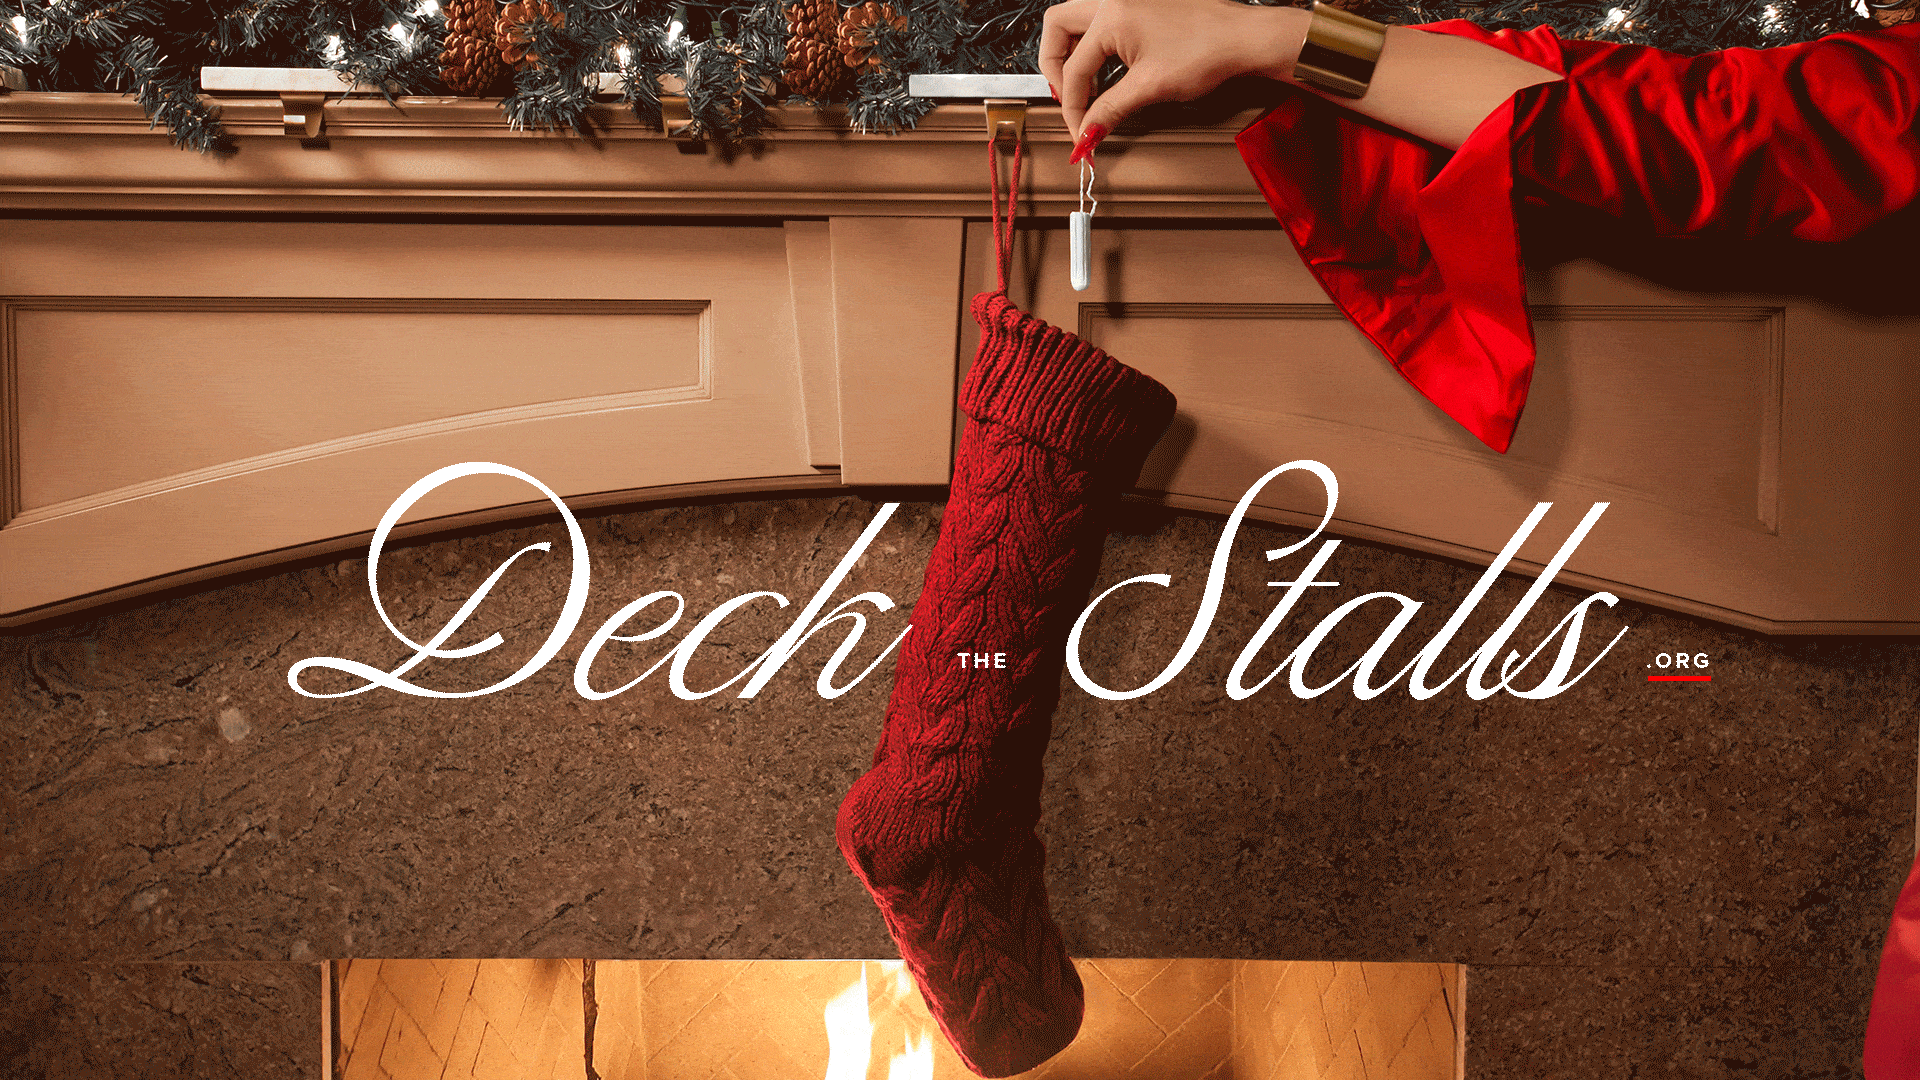 Stocking hanging over a fireplace, with Crampus' hand dropping a tampon into it.